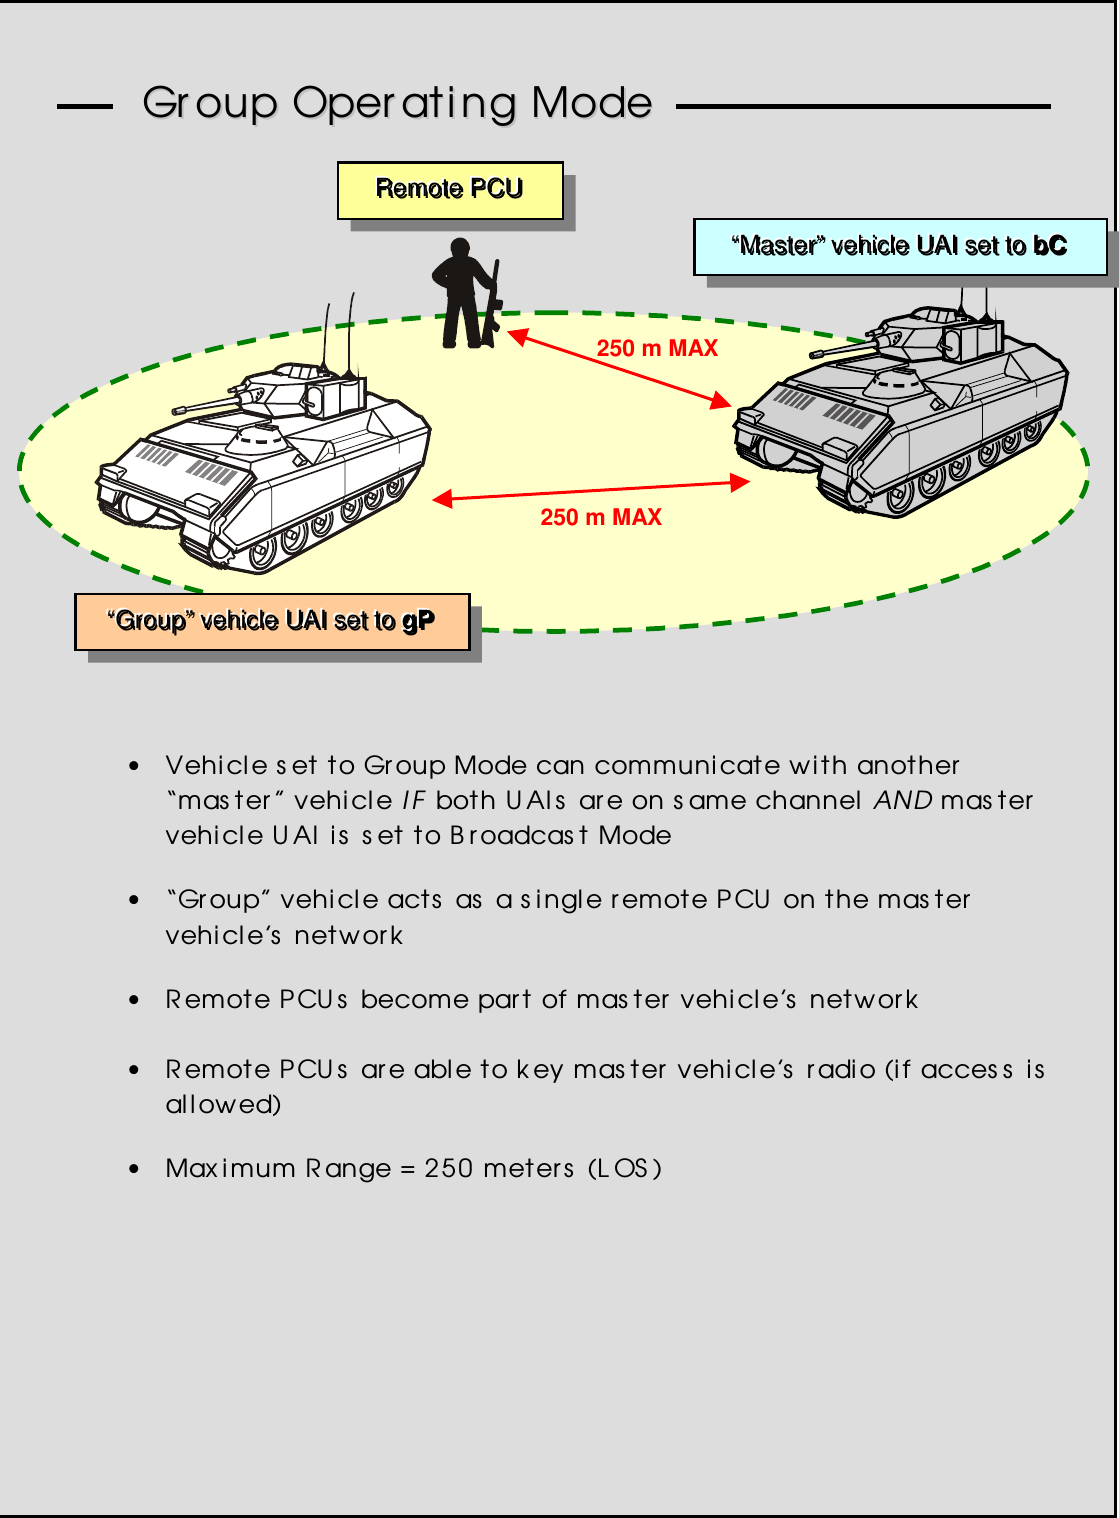 GGrroouupp  OOppeerraattiinngg  MMooddee• Vehicle s et to Group Mode can communicate with another“mas ter” vehicle I F  both U AI s are on s ame channel AND mas tervehicle U AI is set to B roadcas t Mode• “Group” vehicle acts as a s i ngle remote PCU on the mas tervehicle’s network• R emote PCU s become part of mas ter vehicle’s network• R emote PCU s are able to key master vehicle’s radio (if access isallowed)• Max imum Range = 250 meters (LOS)“““GGGrrrooouuuppp”””   vvveeehhhiiicccllleee   UUUAAAIII   ssseeettt   tttooo   gggPPP250 m MAX“““MMMaaasssttteeerrr”””   vvveeehhhiiicccllleee   UUUAAAIII   ssseeettt   tttooo   bbbCCCRRReeemmmooottteee   PPPCCCUUU250 m MAX